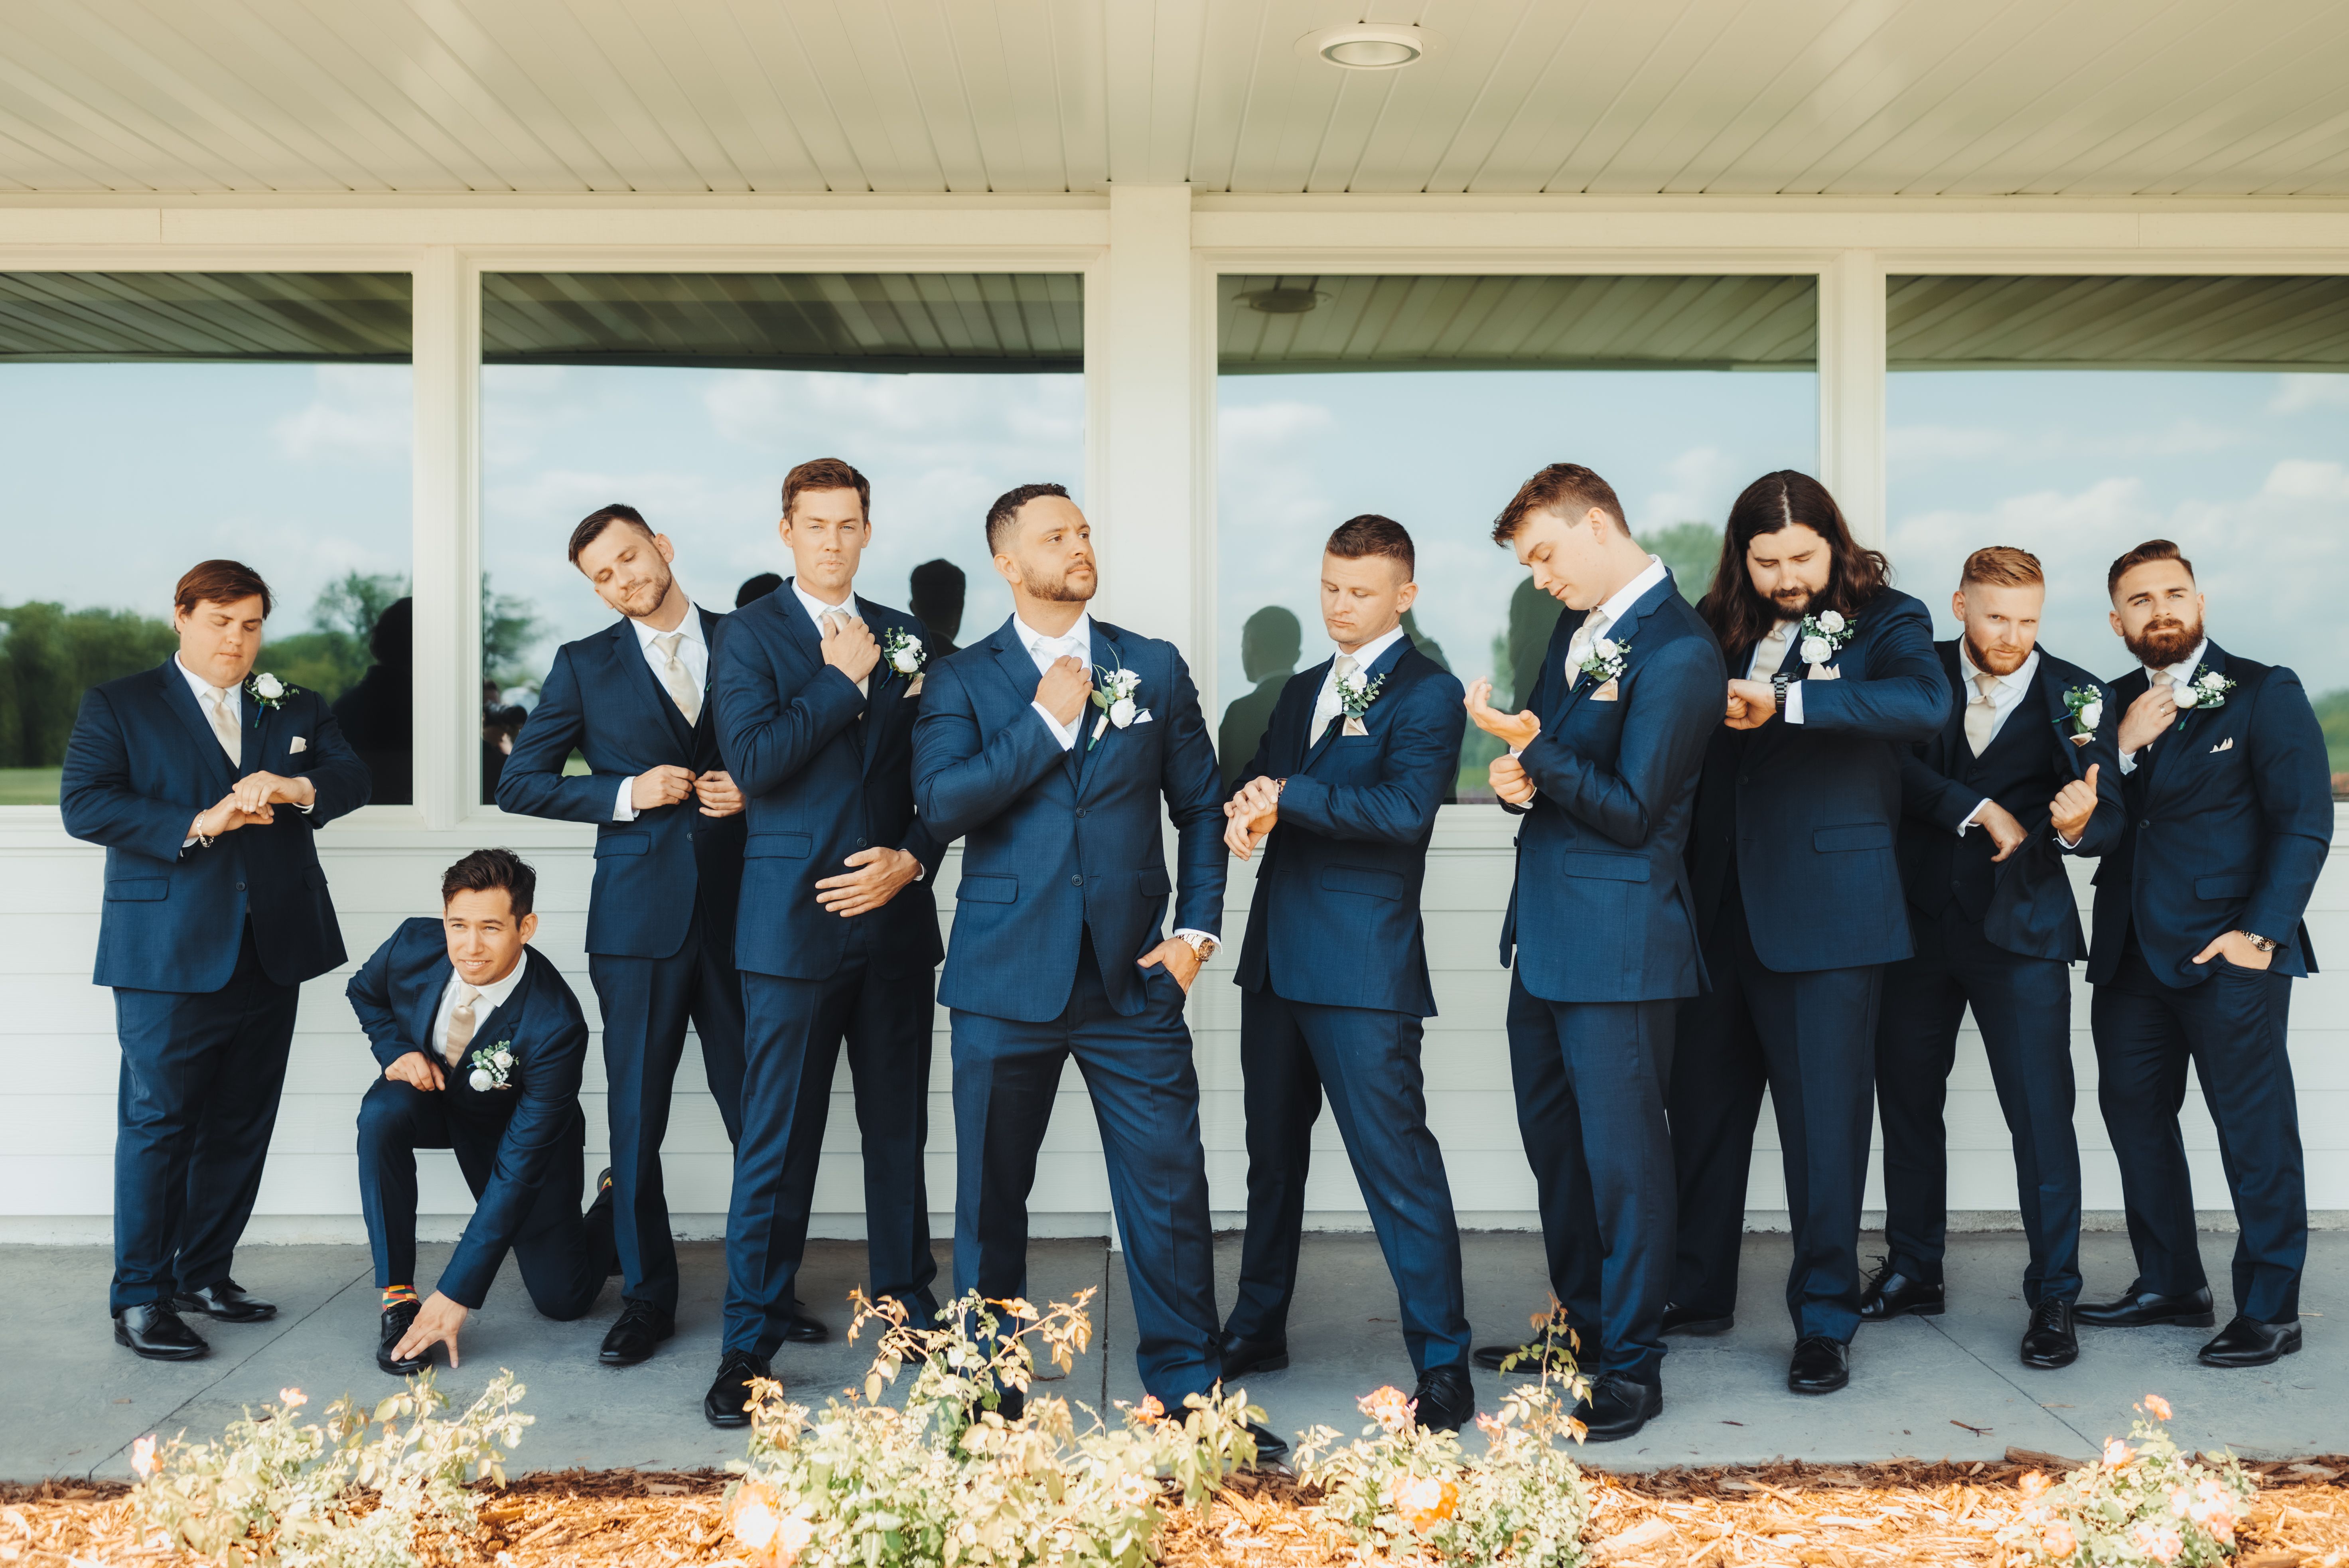 Invite your groomsmen and wedding party to Generation Tux to perfectly match suit and tuxedo rentals